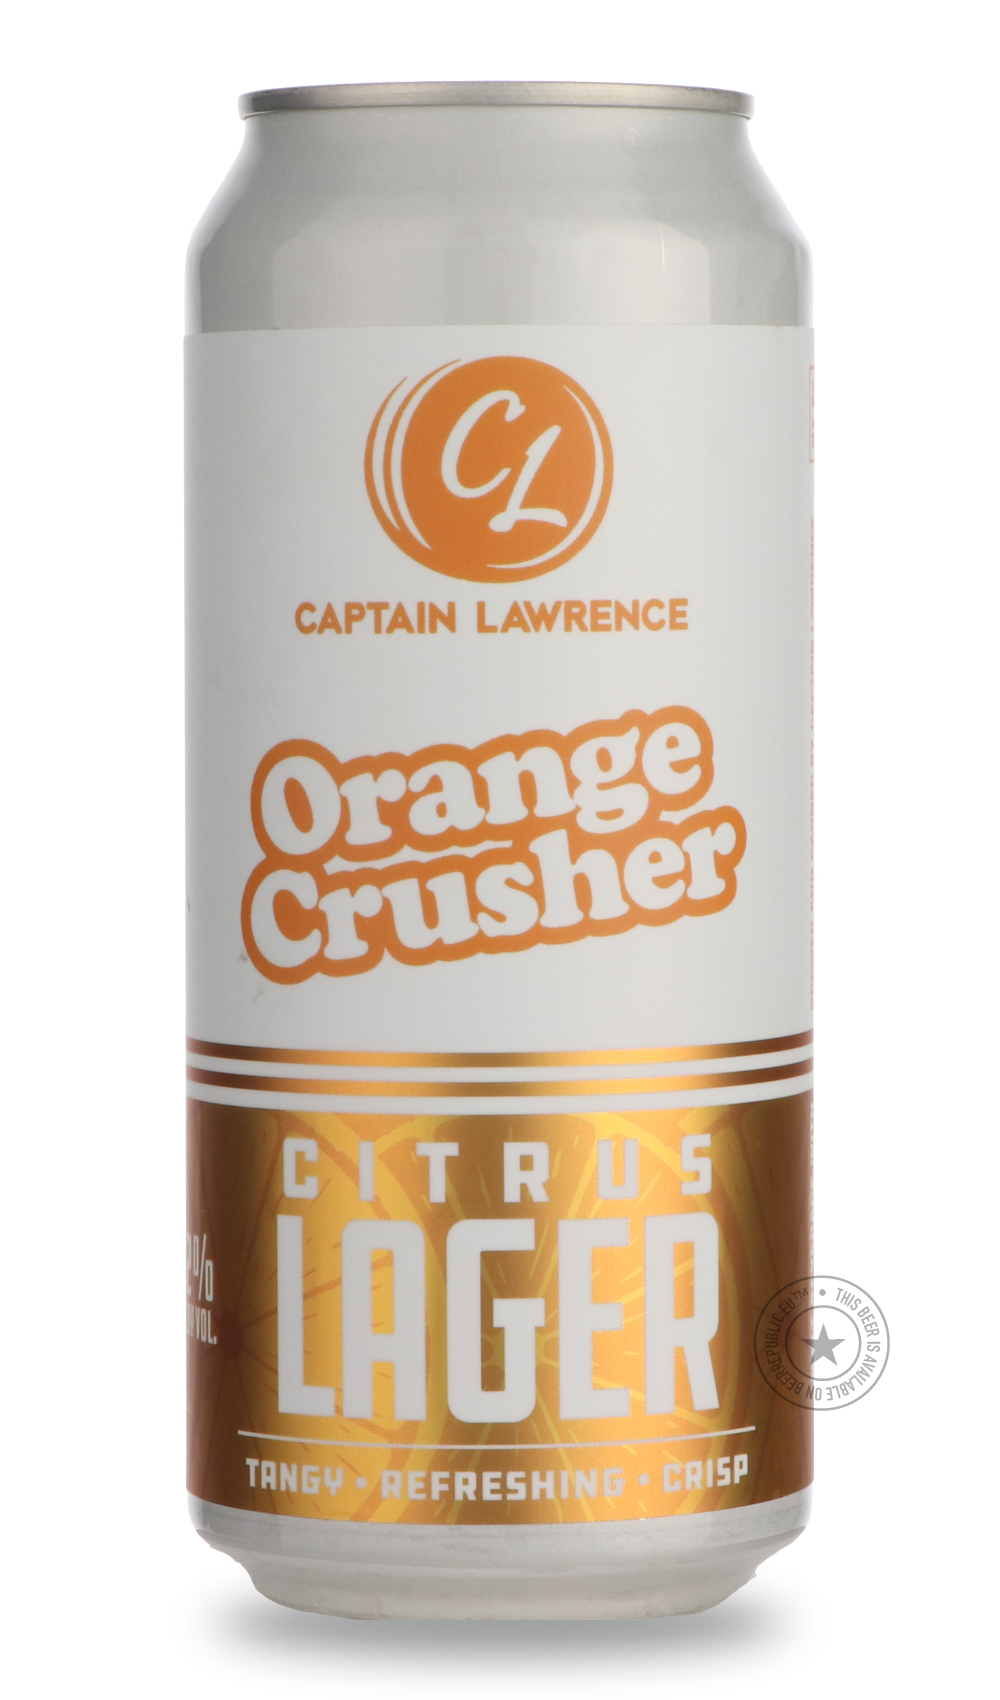 -Captain Lawrence- Orange Crusher-Pale- Only @ Beer Republic - The best online beer store for American & Canadian craft beer - Buy beer online from the USA and Canada - Bier online kopen - Amerikaans bier kopen - Craft beer store - Craft beer kopen - Amerikanisch bier kaufen - Bier online kaufen - Acheter biere online - IPA - Stout - Porter - New England IPA - Hazy IPA - Imperial Stout - Barrel Aged - Barrel Aged Imperial Stout - Brown - Dark beer - Blond - Blonde - Pilsner - Lager - Wheat - Weizen - Amber 